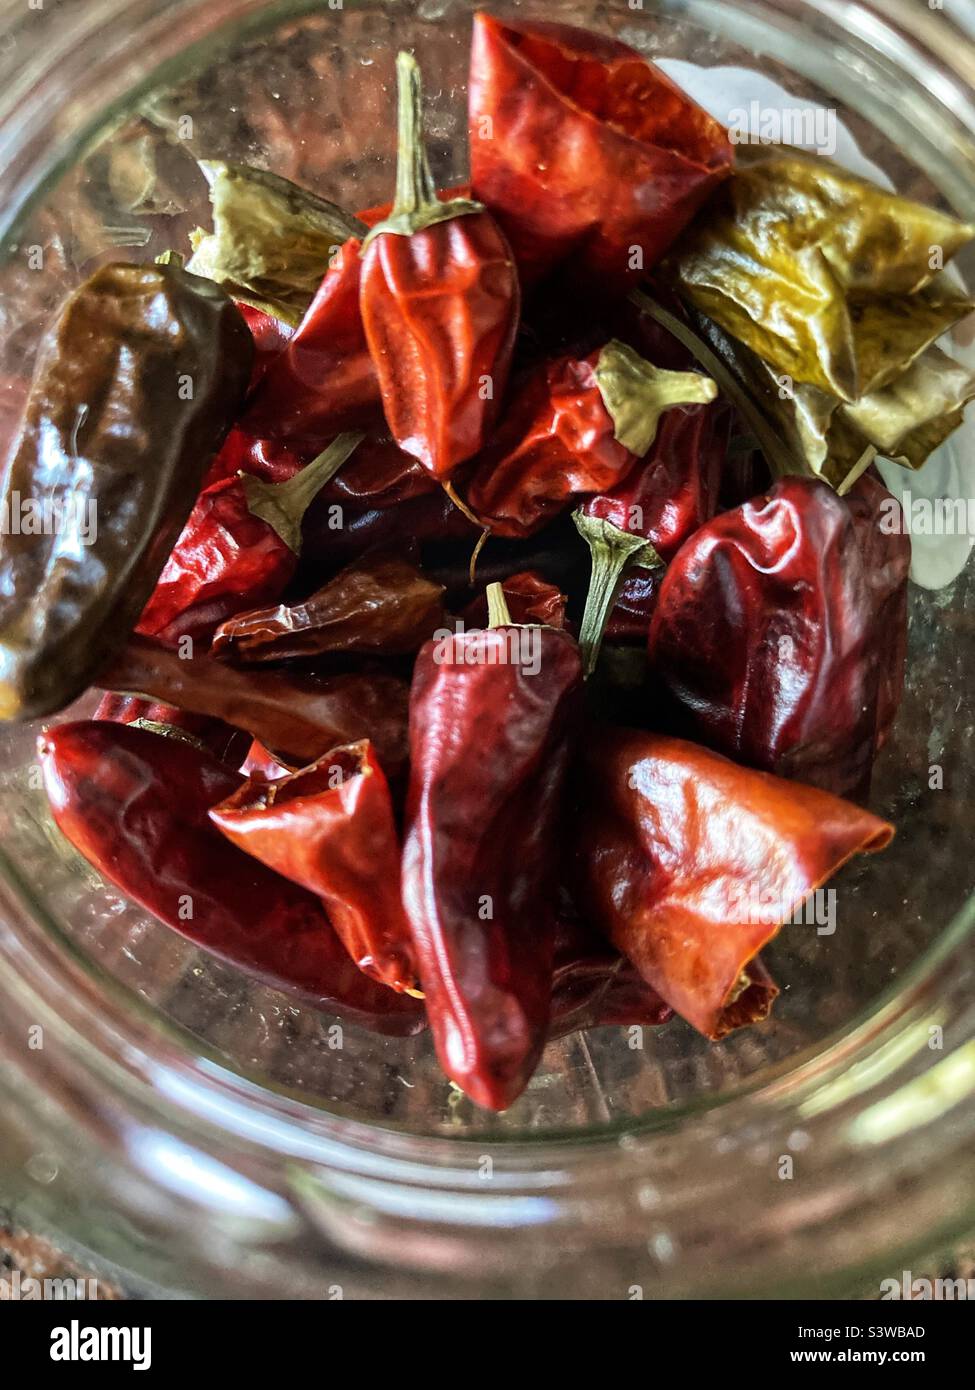 A Glass of dried chili Peppers Stock Photo